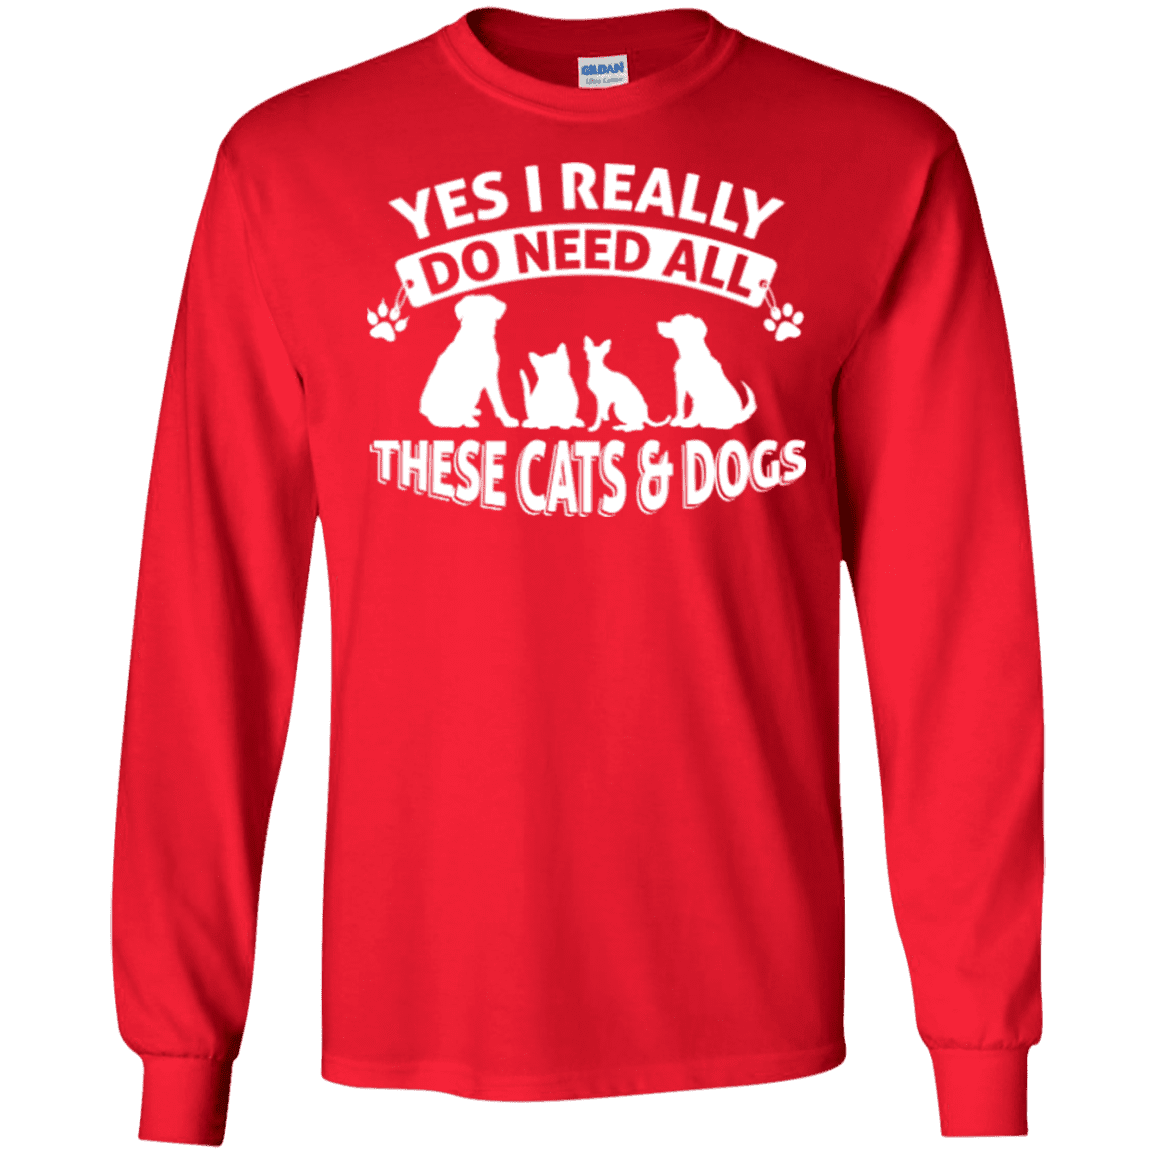 Yes I Need All These Cats and Dogs - Long Sleeve T Shirt.